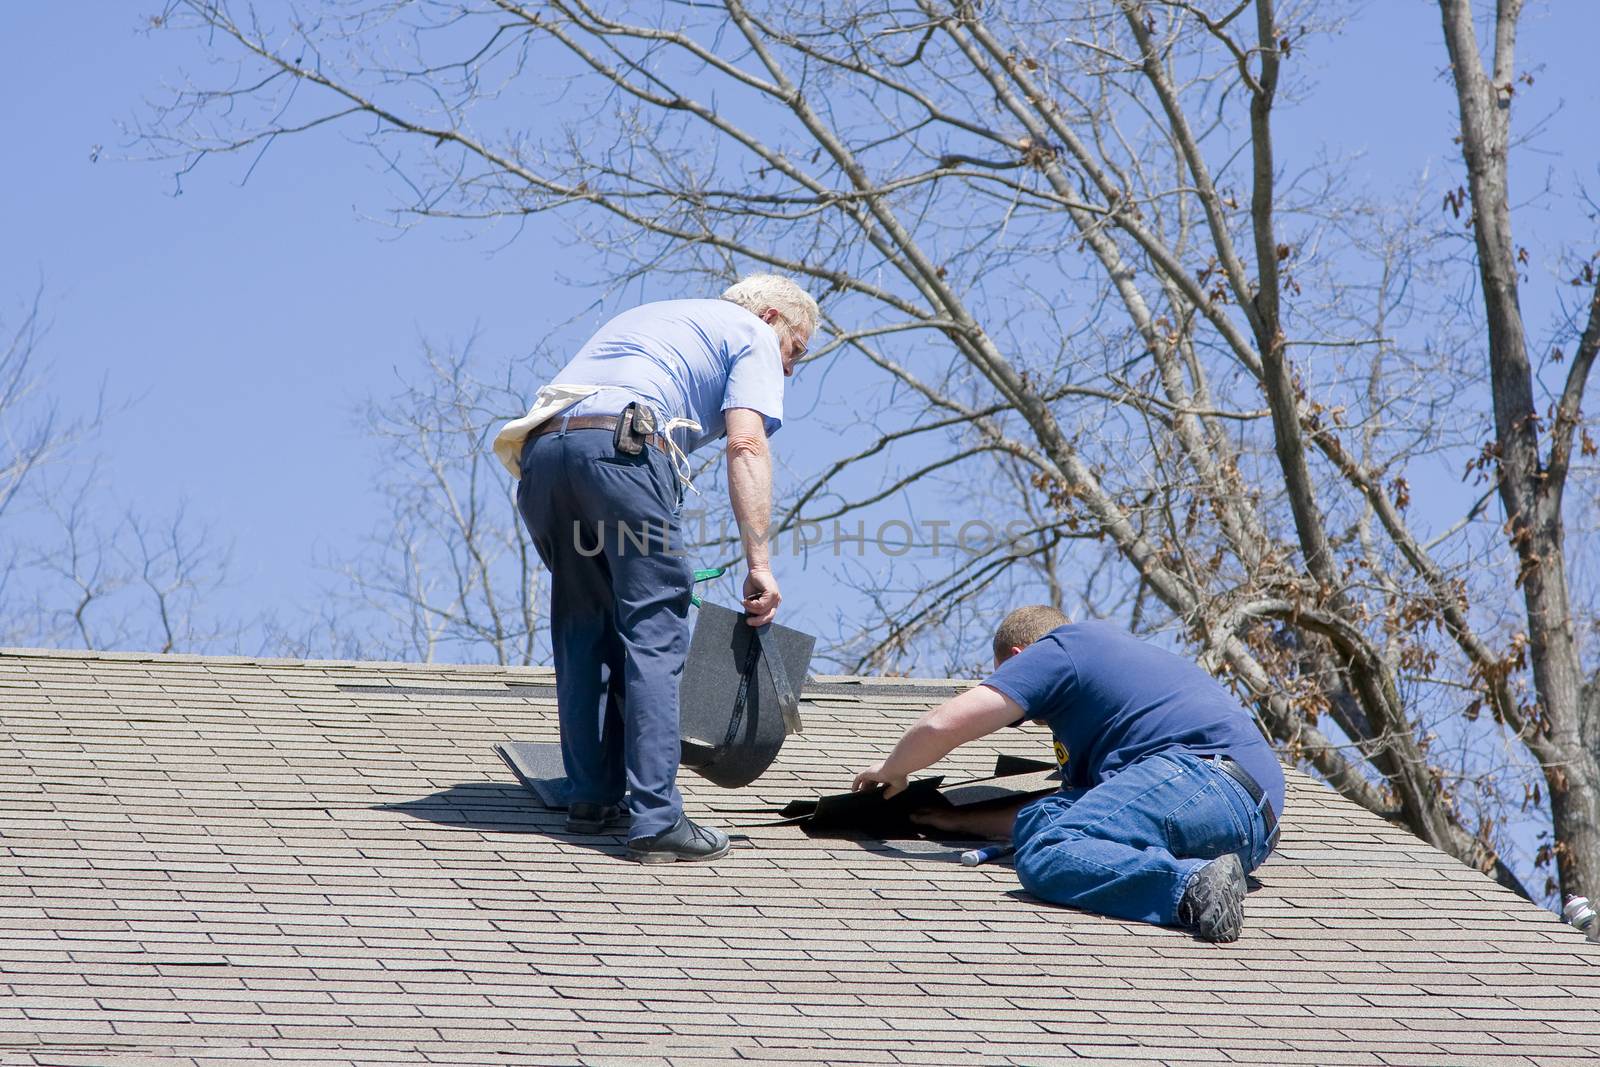 Roofing contractor repairing damaged roof on home after recent wind storms, many roofs were damaged